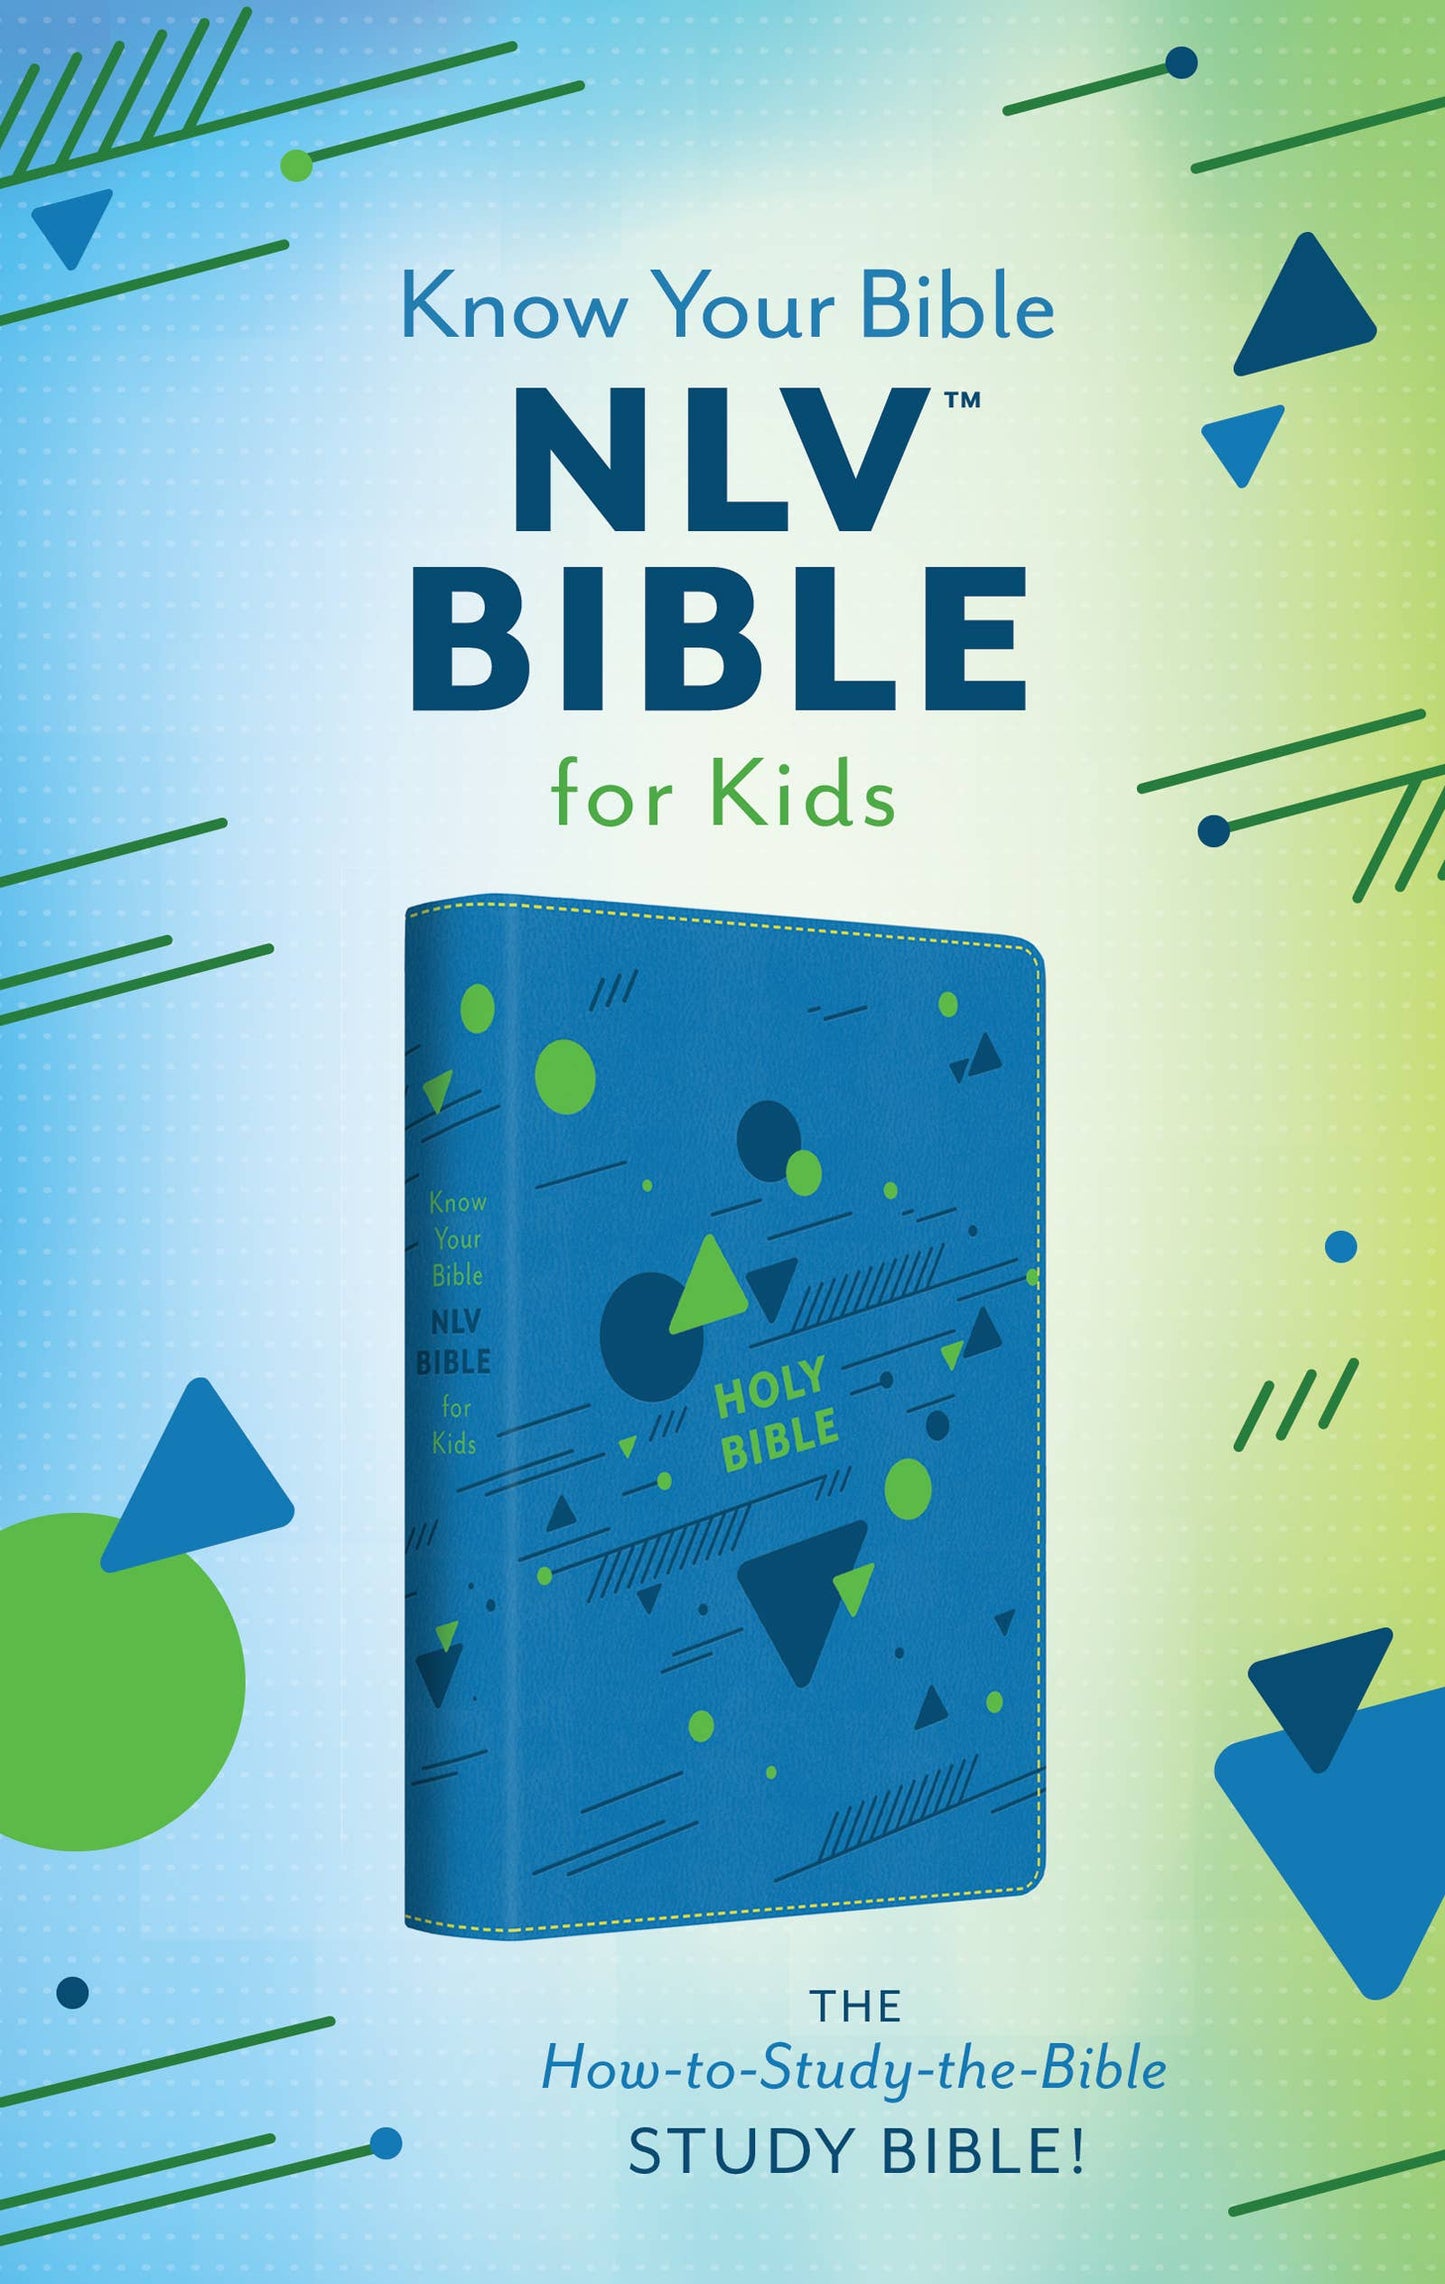 The Know Your Bible NLV Bible for Kids [Boy cover]